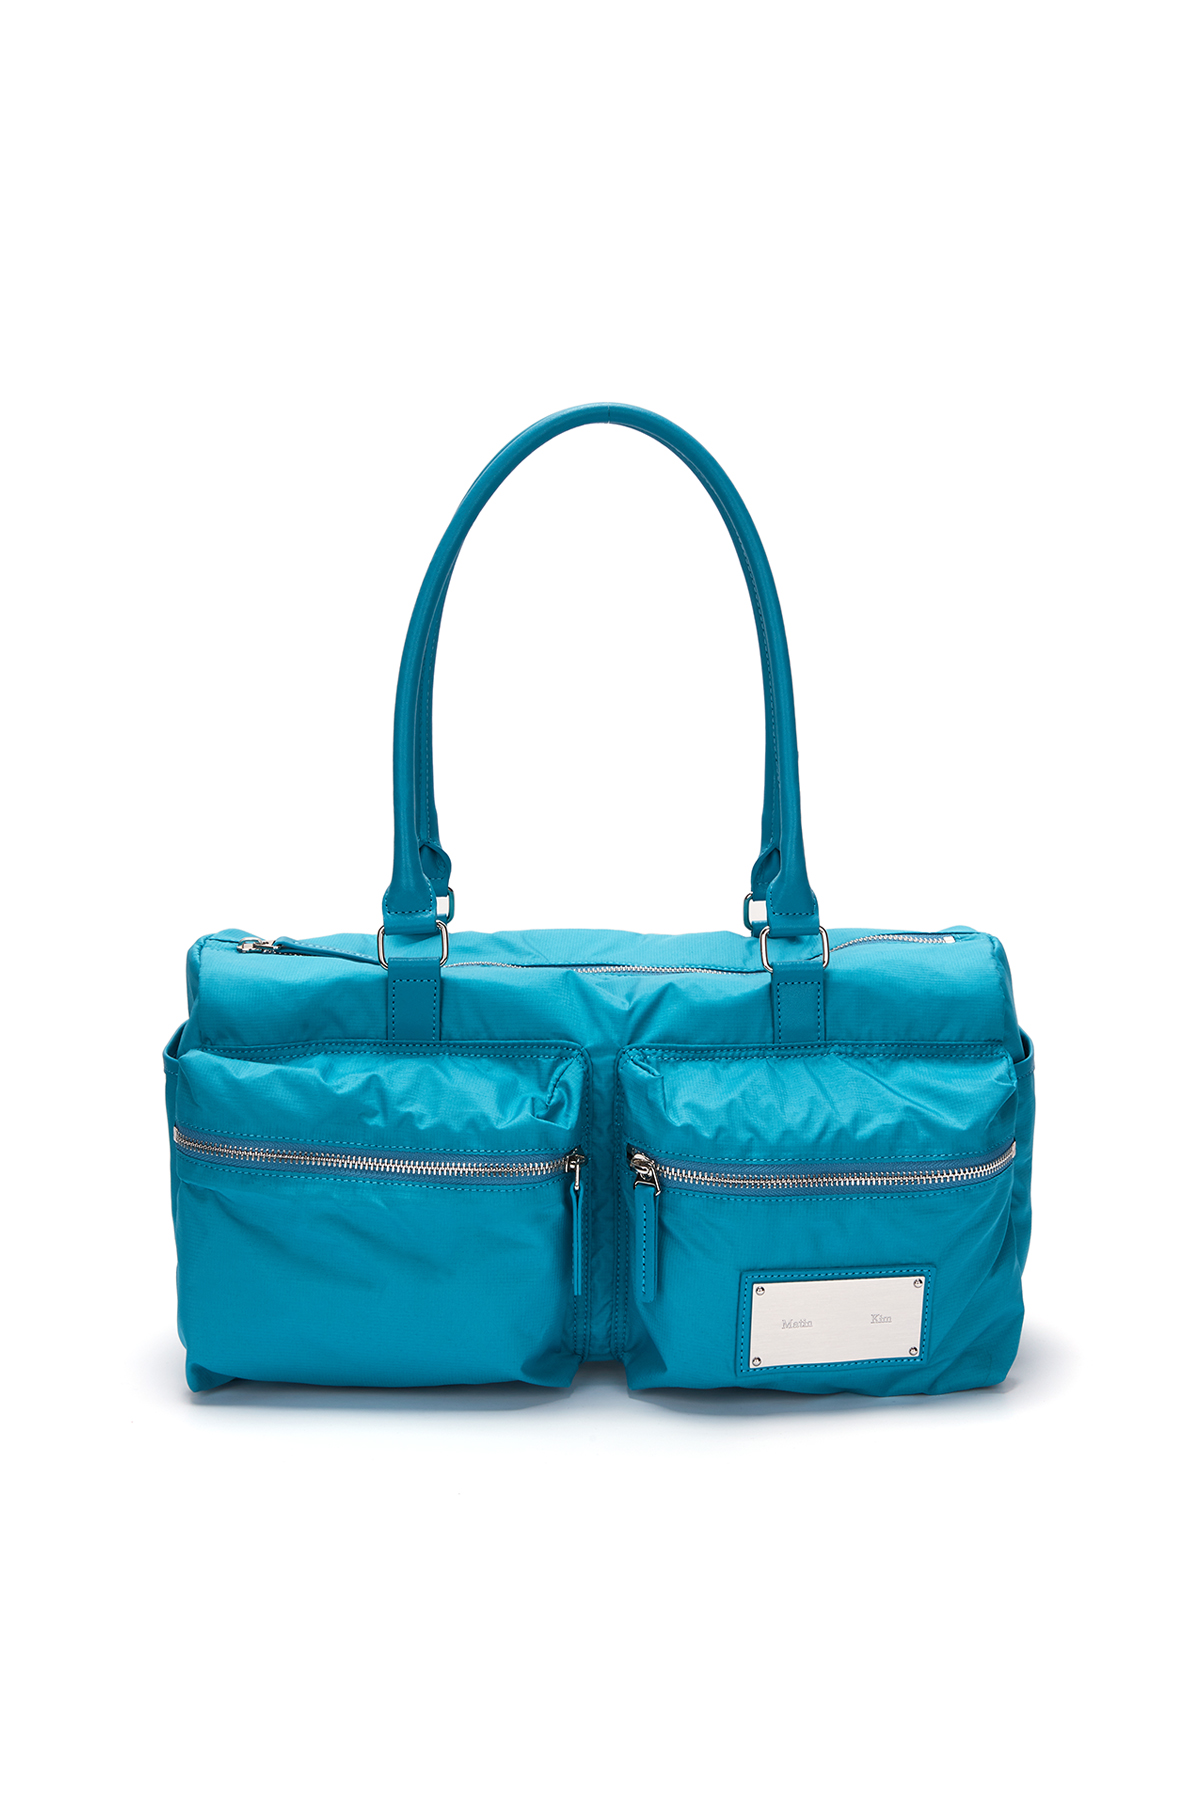 CARGO SPORTY TOTE BAG IN TURQUISE BLUE